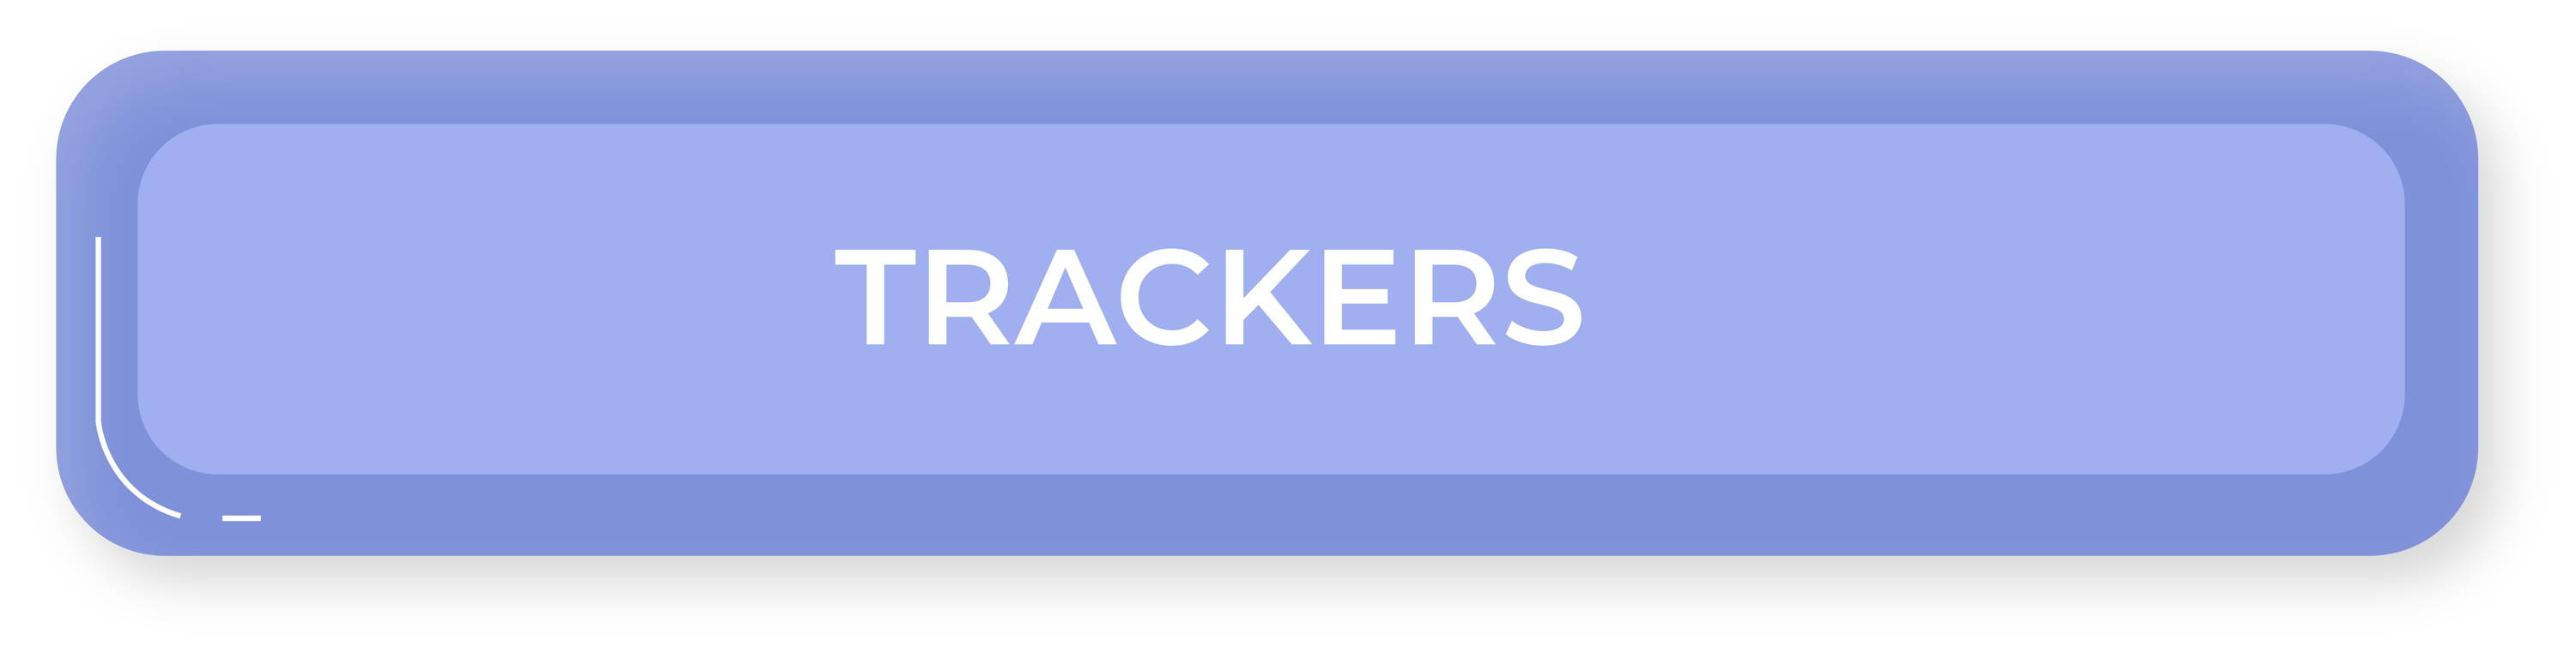 browse by trackers